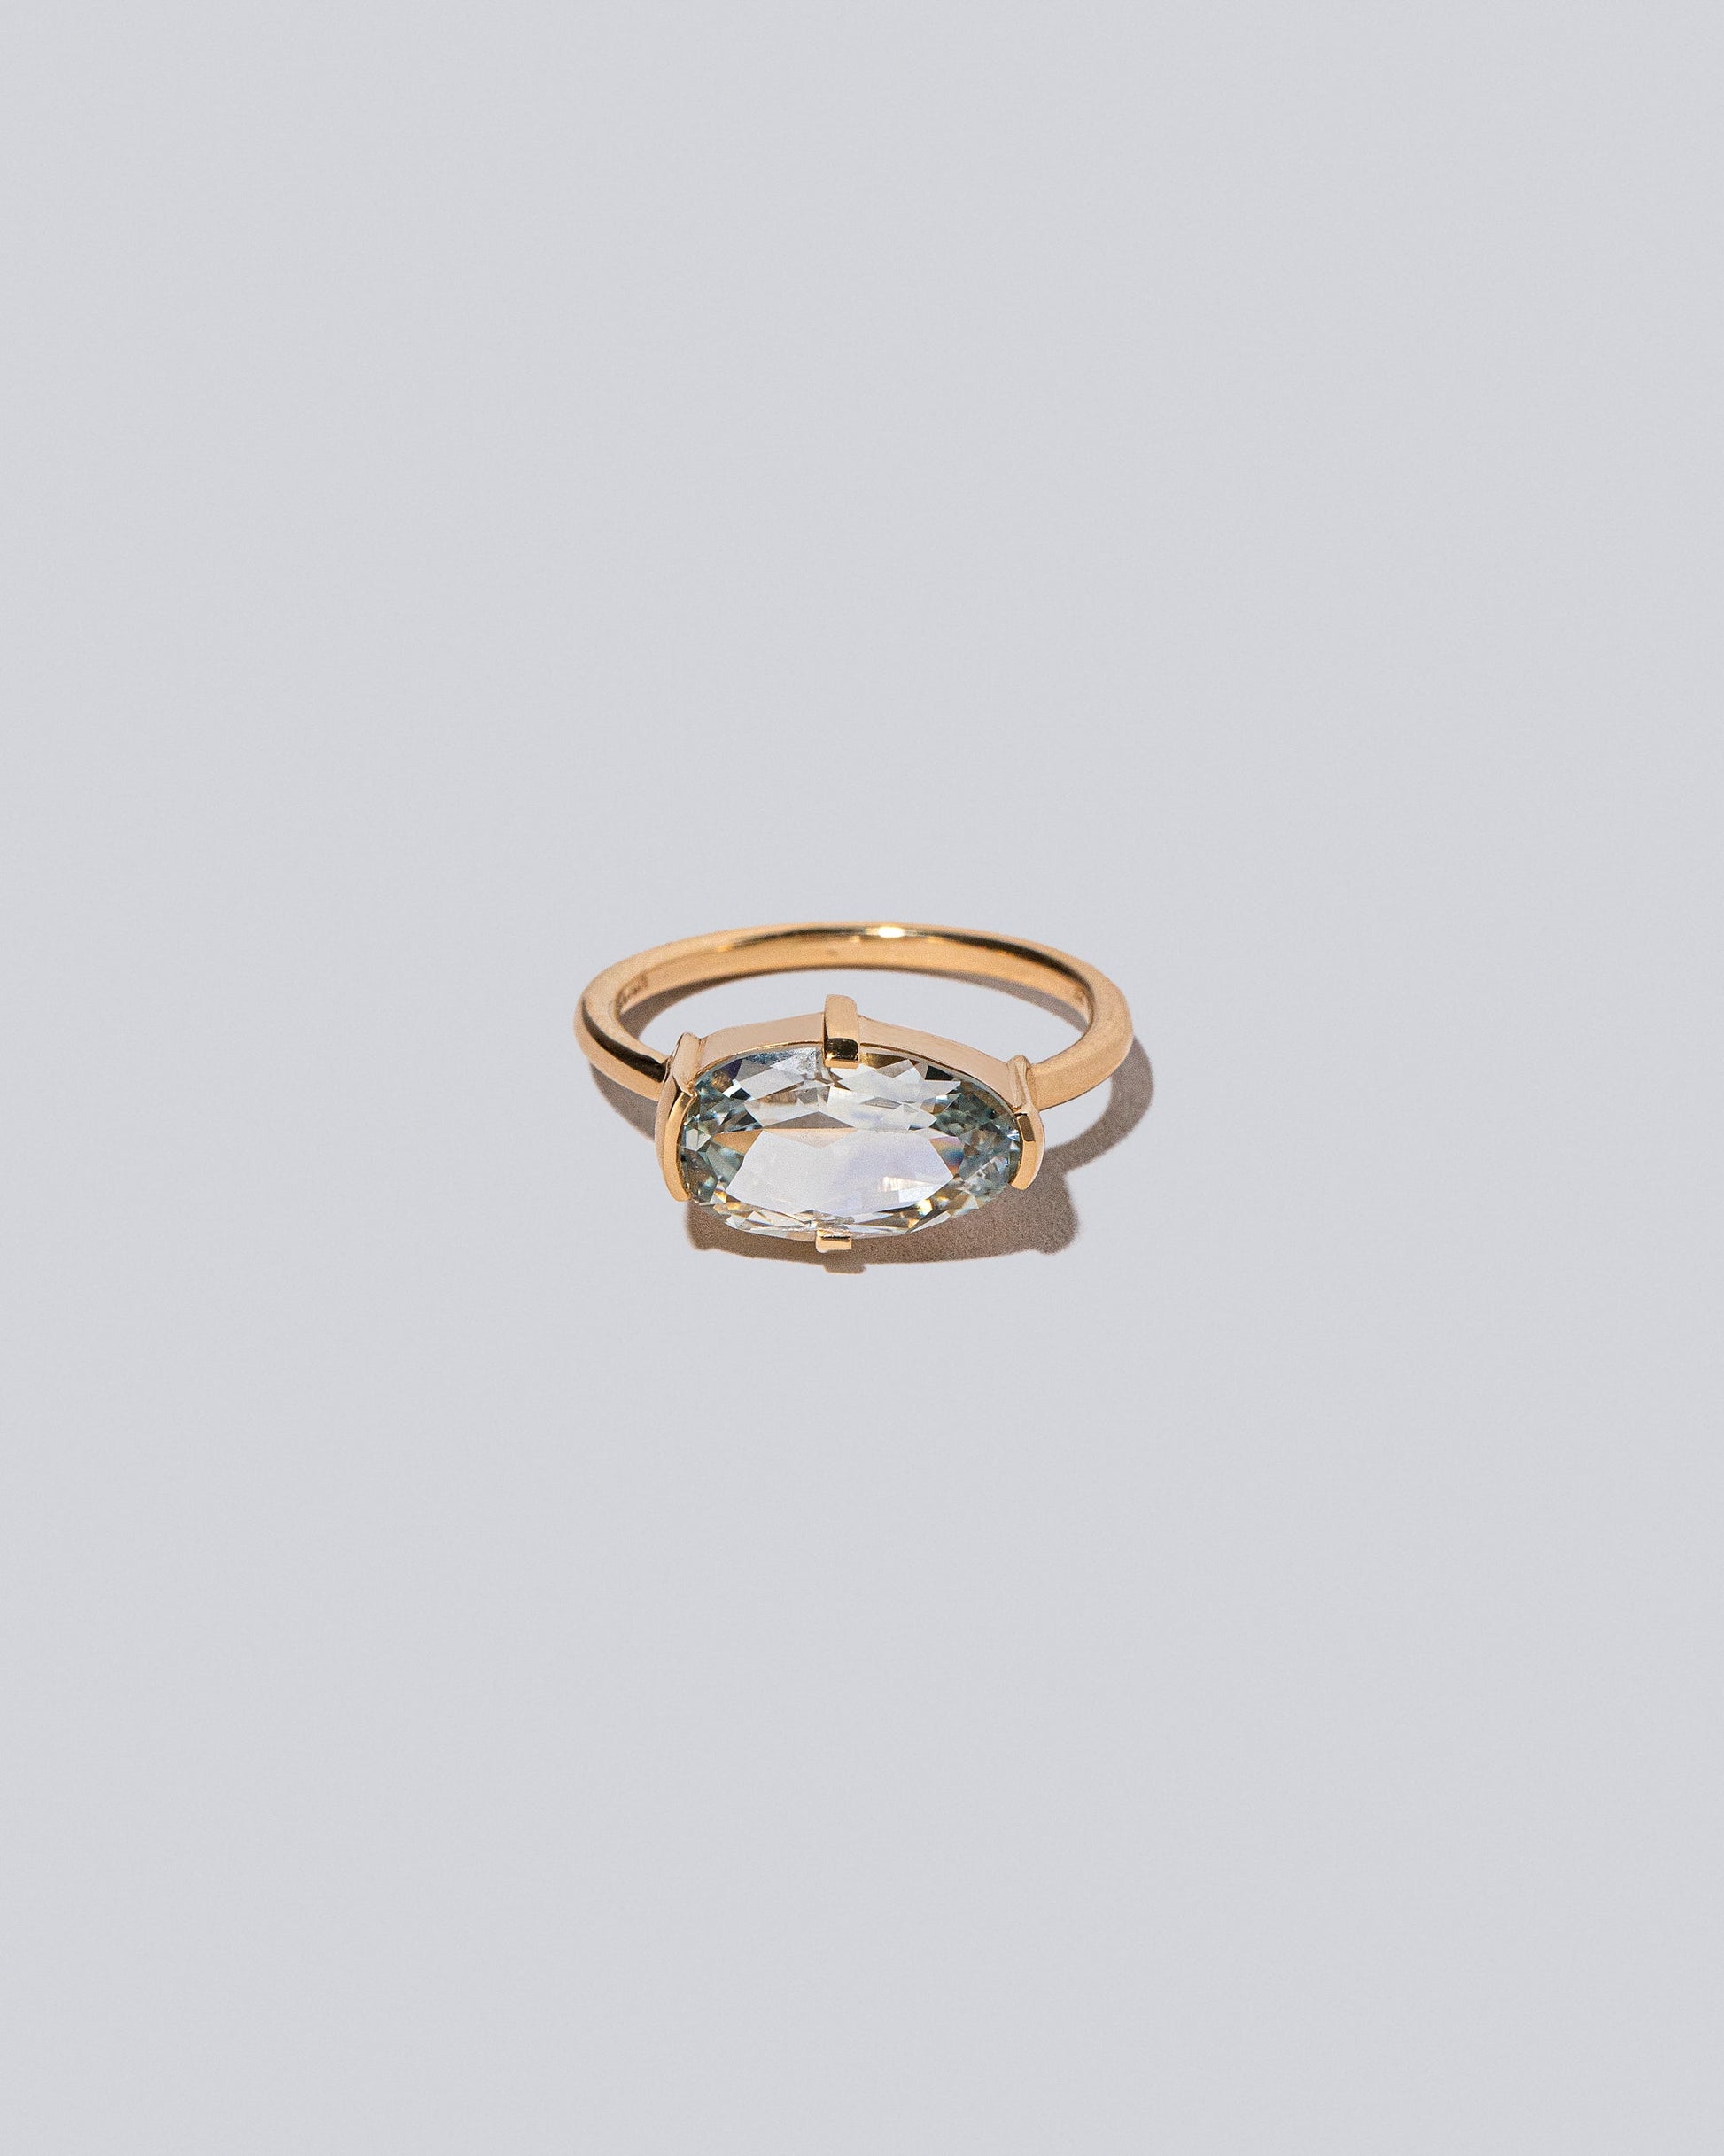 Product photo of the Starling Ring on a light color background 